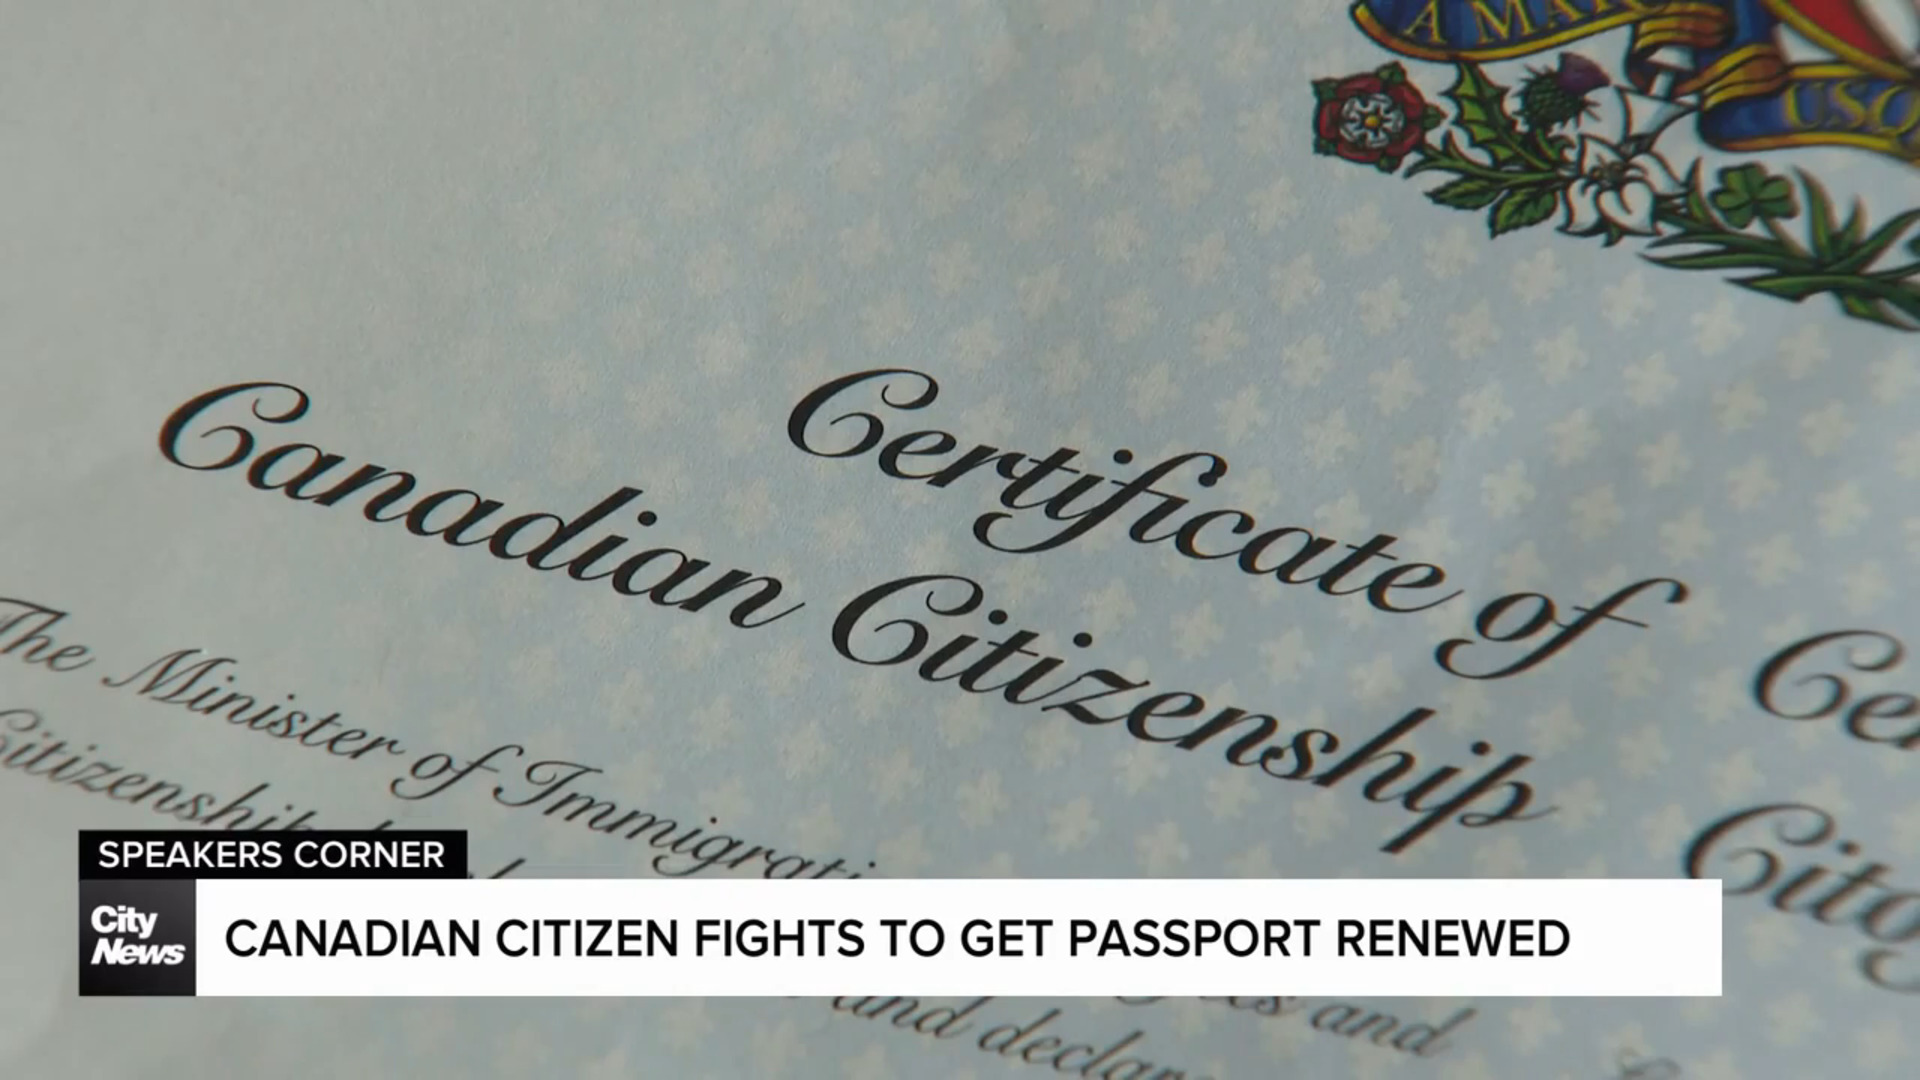 'The system needs an overhaul': Toronto couple frustrated trying to renew daughter’s passport